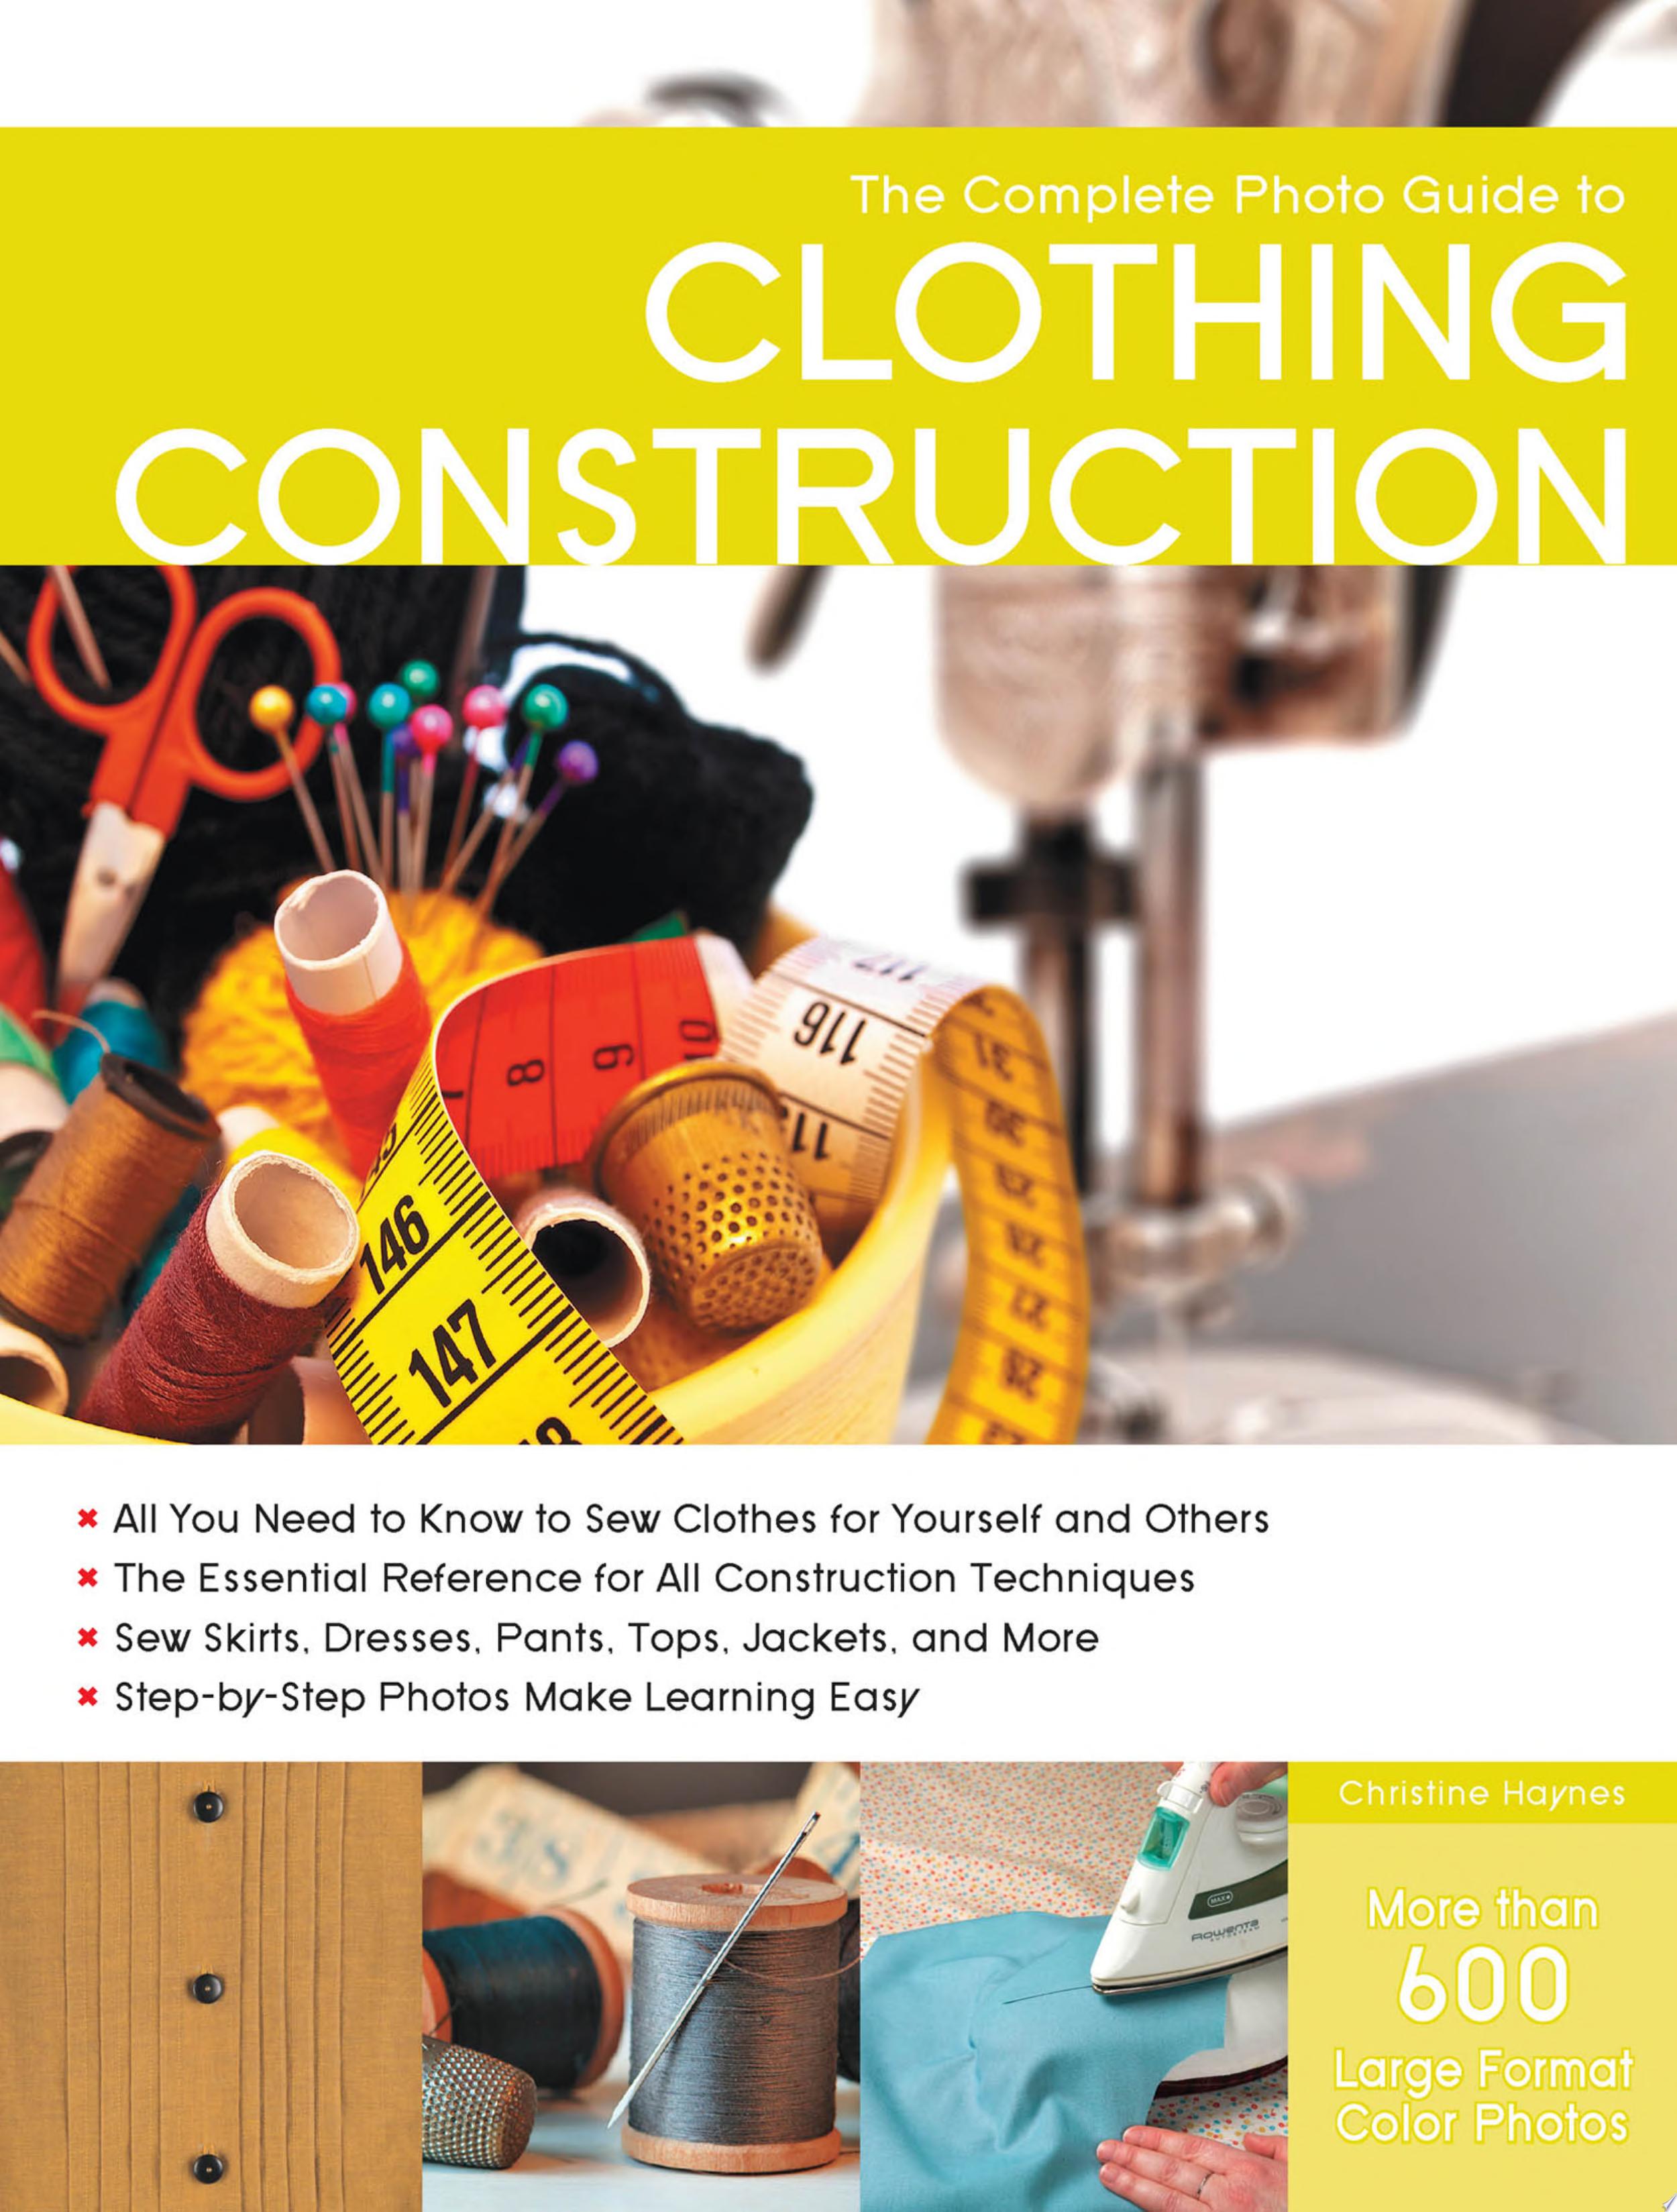 Image for "The Complete Photo Guide to Clothing Construction"